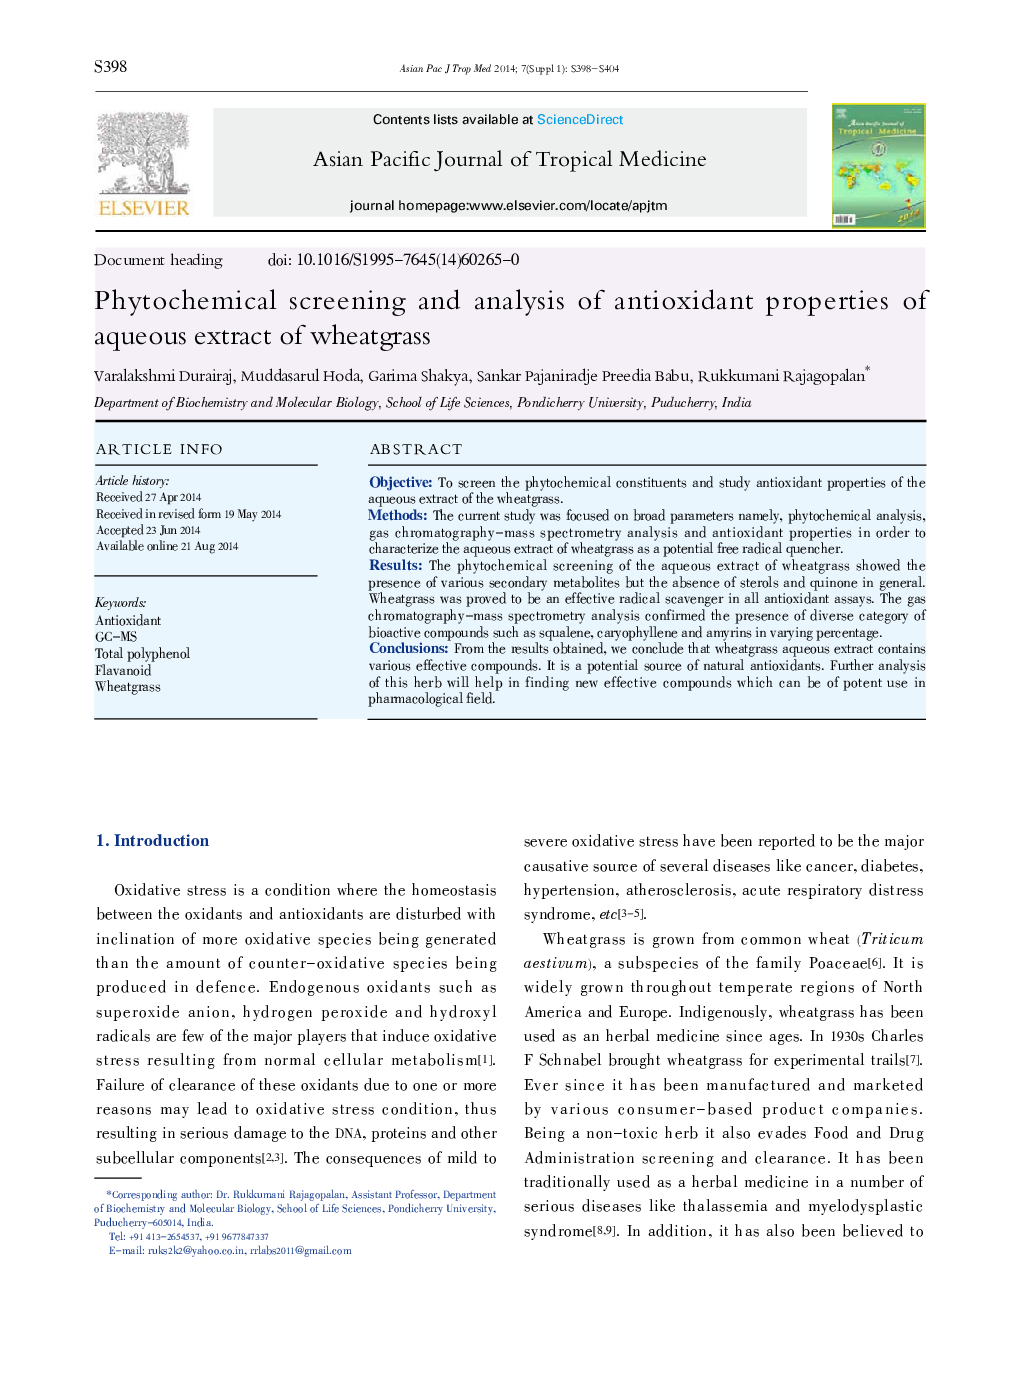 Phytochemical screening and analysis of antioxidant properties of aqueous extract of wheatgrass 